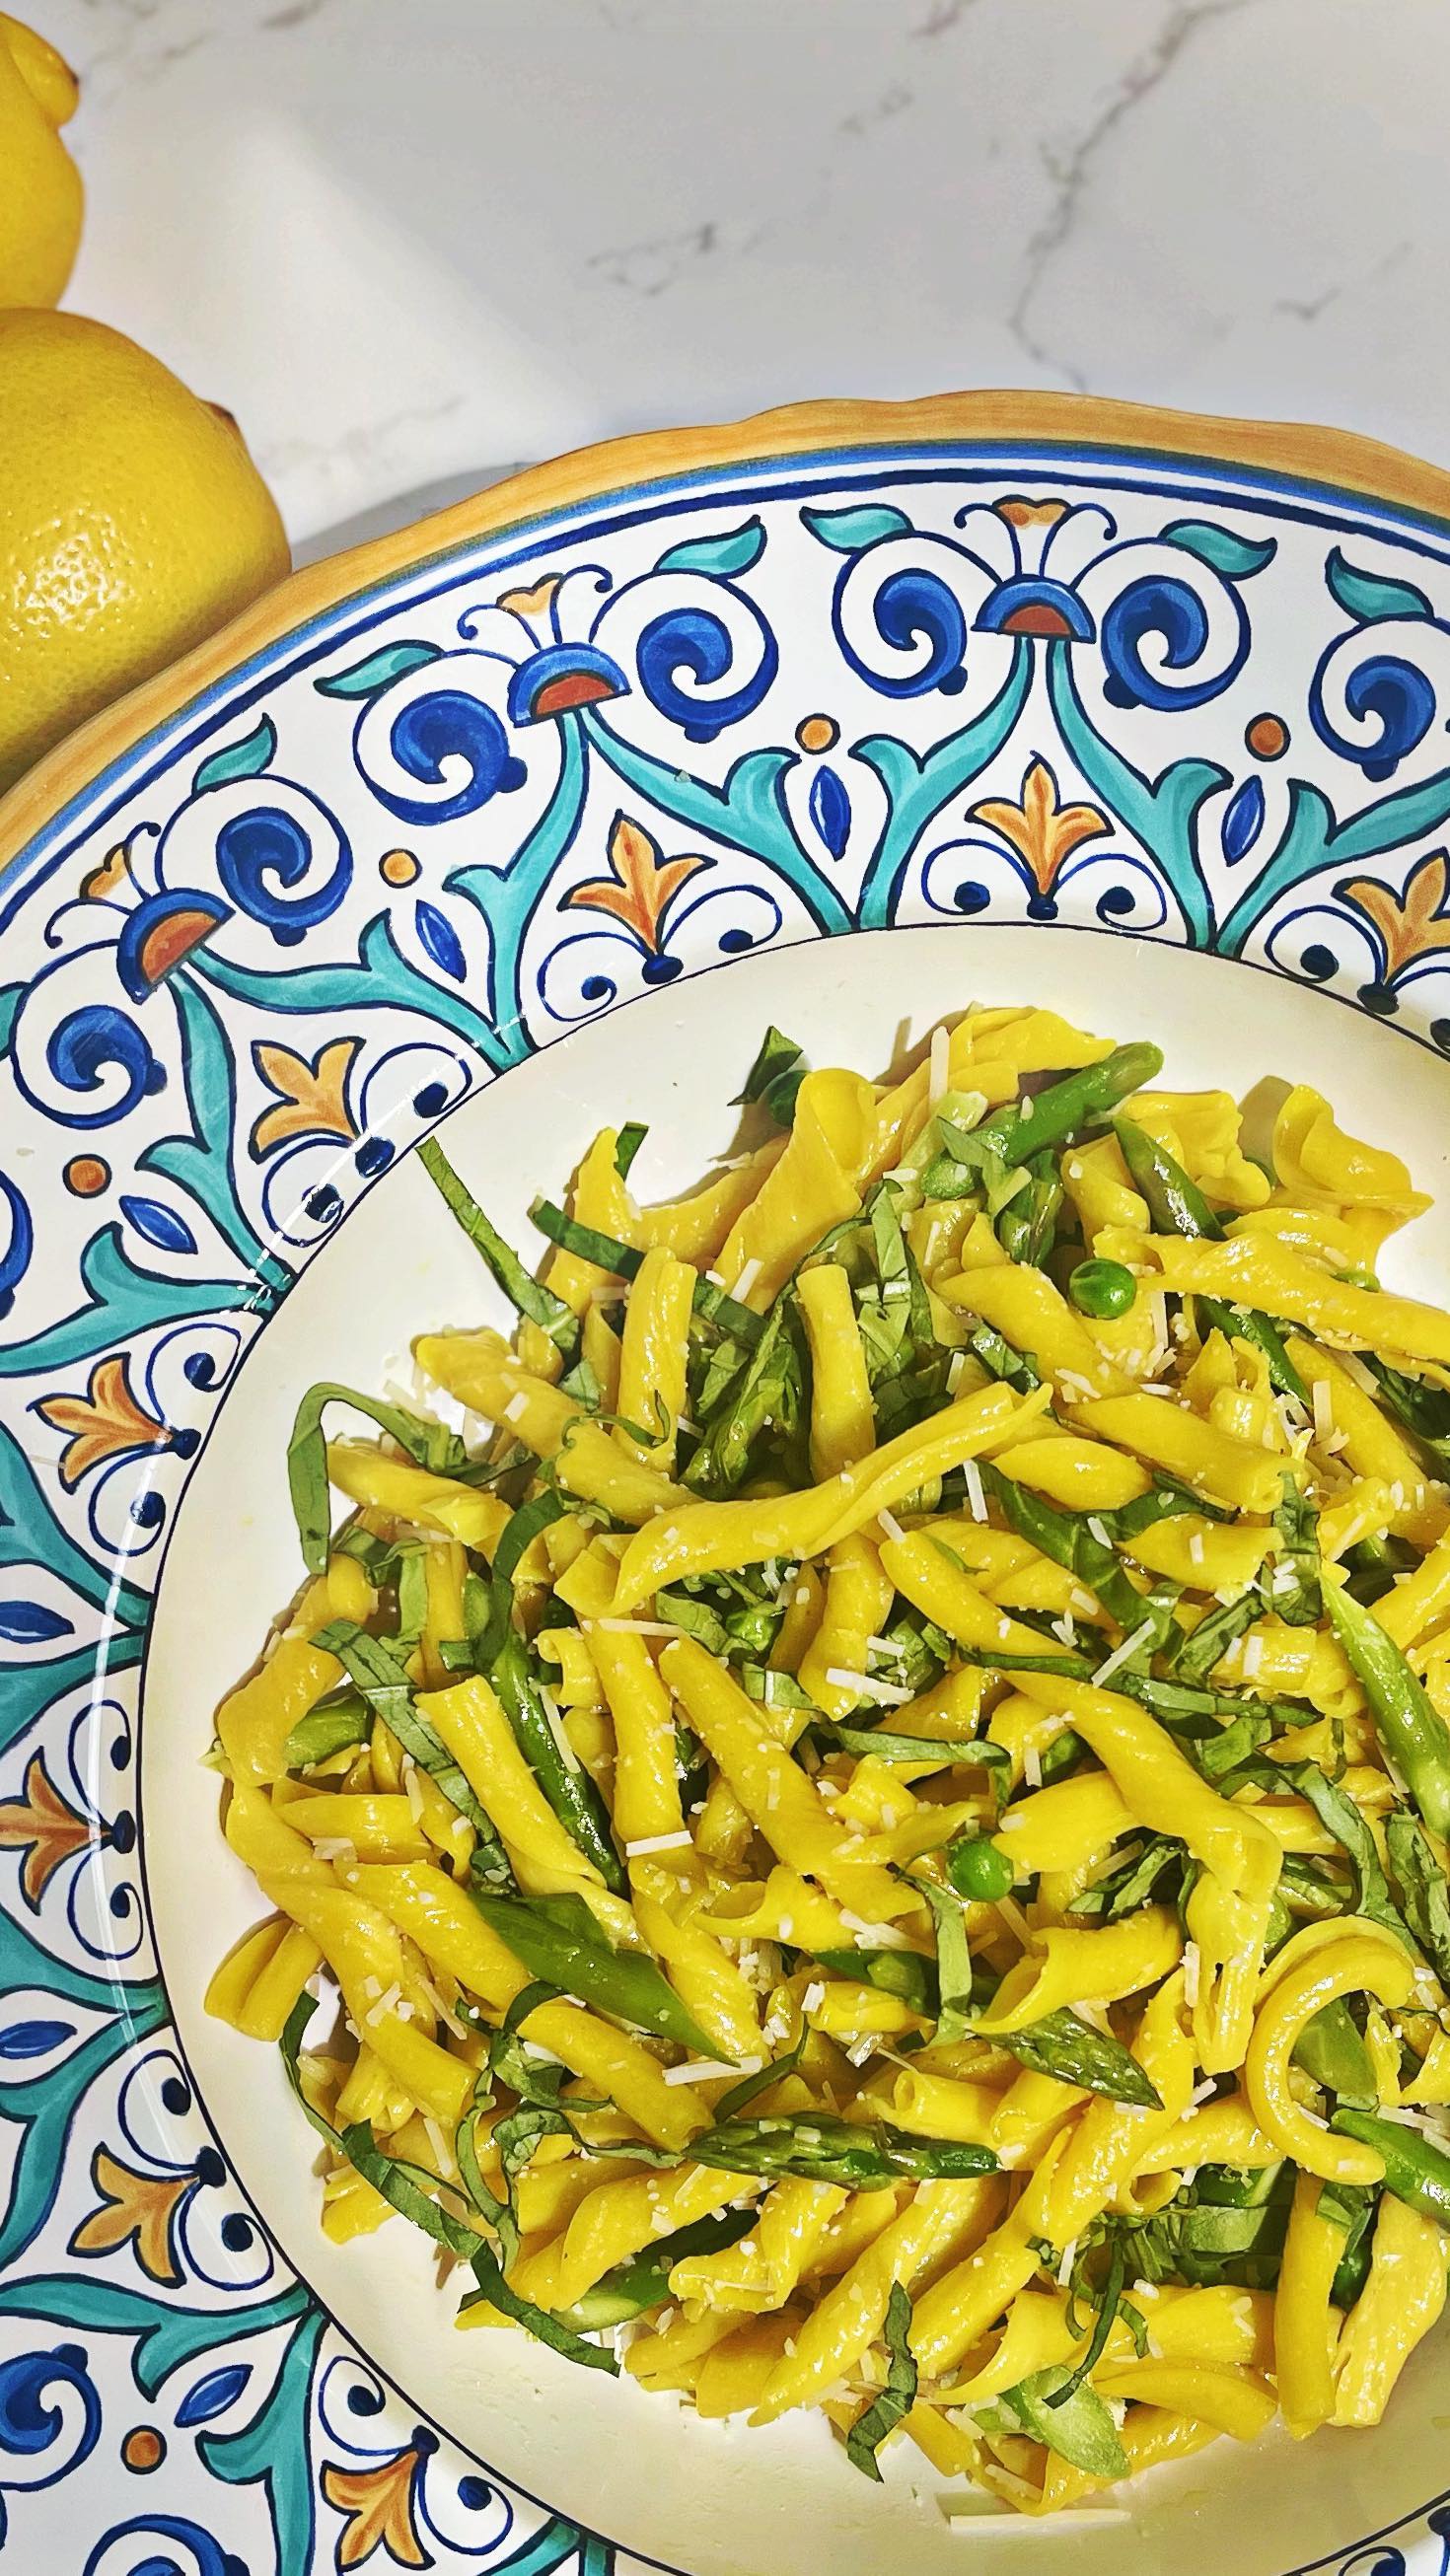 Follow @dinnerreinvented for recipes like this Springtime Lemony Pasta with Asparagus and Peas! It’s an easy one-pot dinner that took less than 20 minutes to make and tastes like the changing season, bright and sunny! Recipe is now up on the DR site #asparagus #peas #springtimevibes #springfood #basil #basilpesto #lemonpasta #weeknightdinner #easymeals #easydinner #onepotmeal #meatlessmonday #vegetarianrecipes #dinnerinspo #foodblogger #momblogger #roniproter #dinnerideas #dinnerreinvented